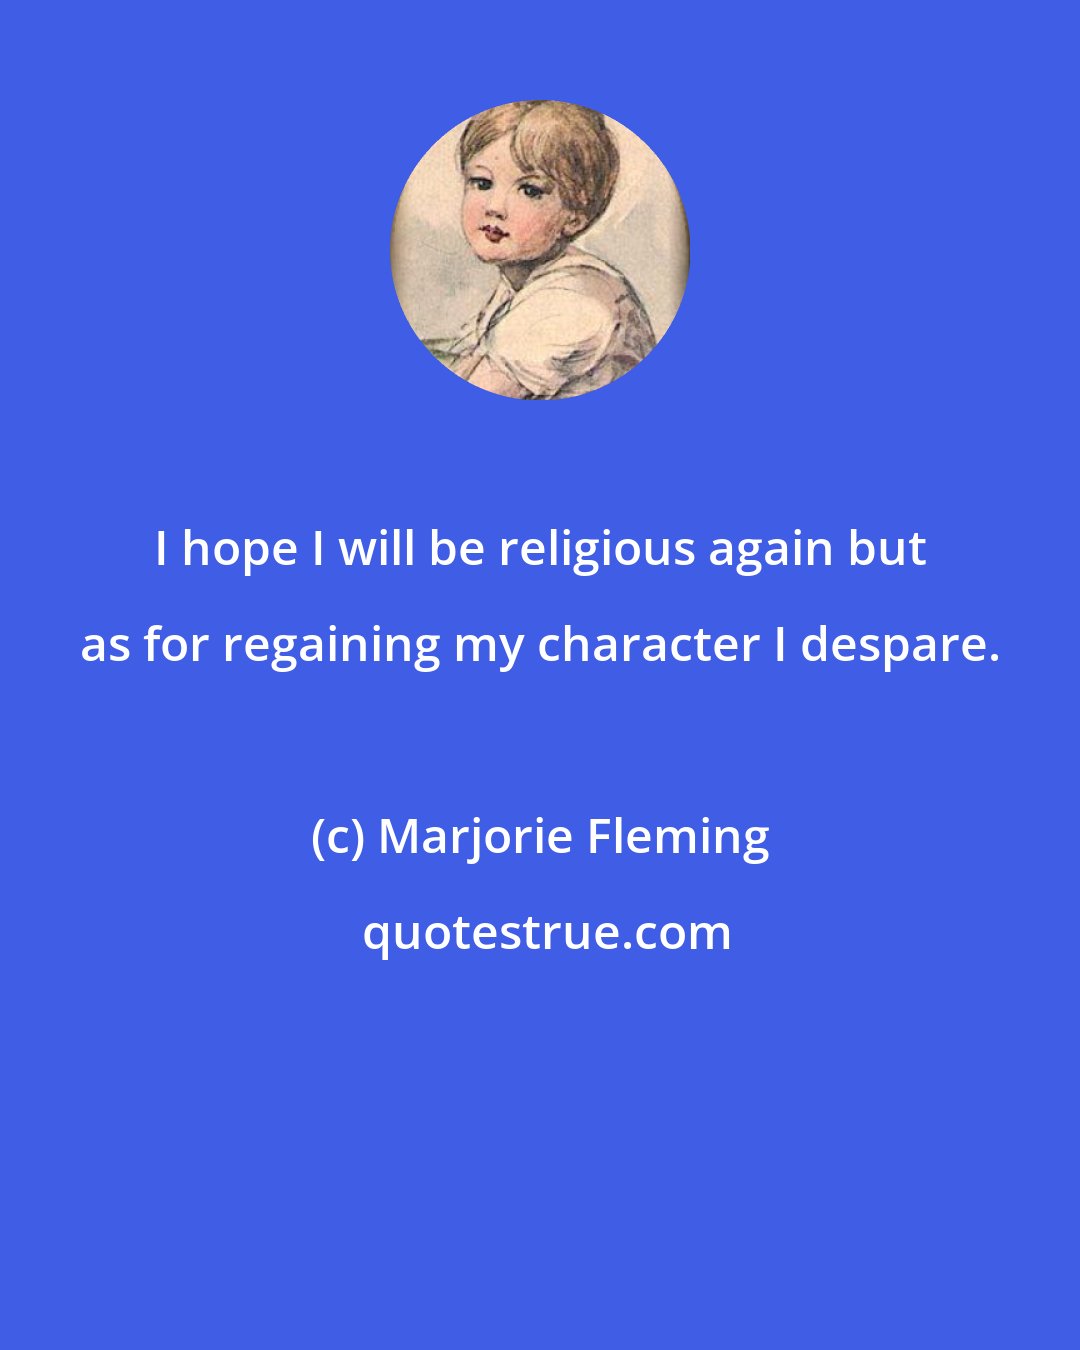 Marjorie Fleming: I hope I will be religious again but as for regaining my character I despare.